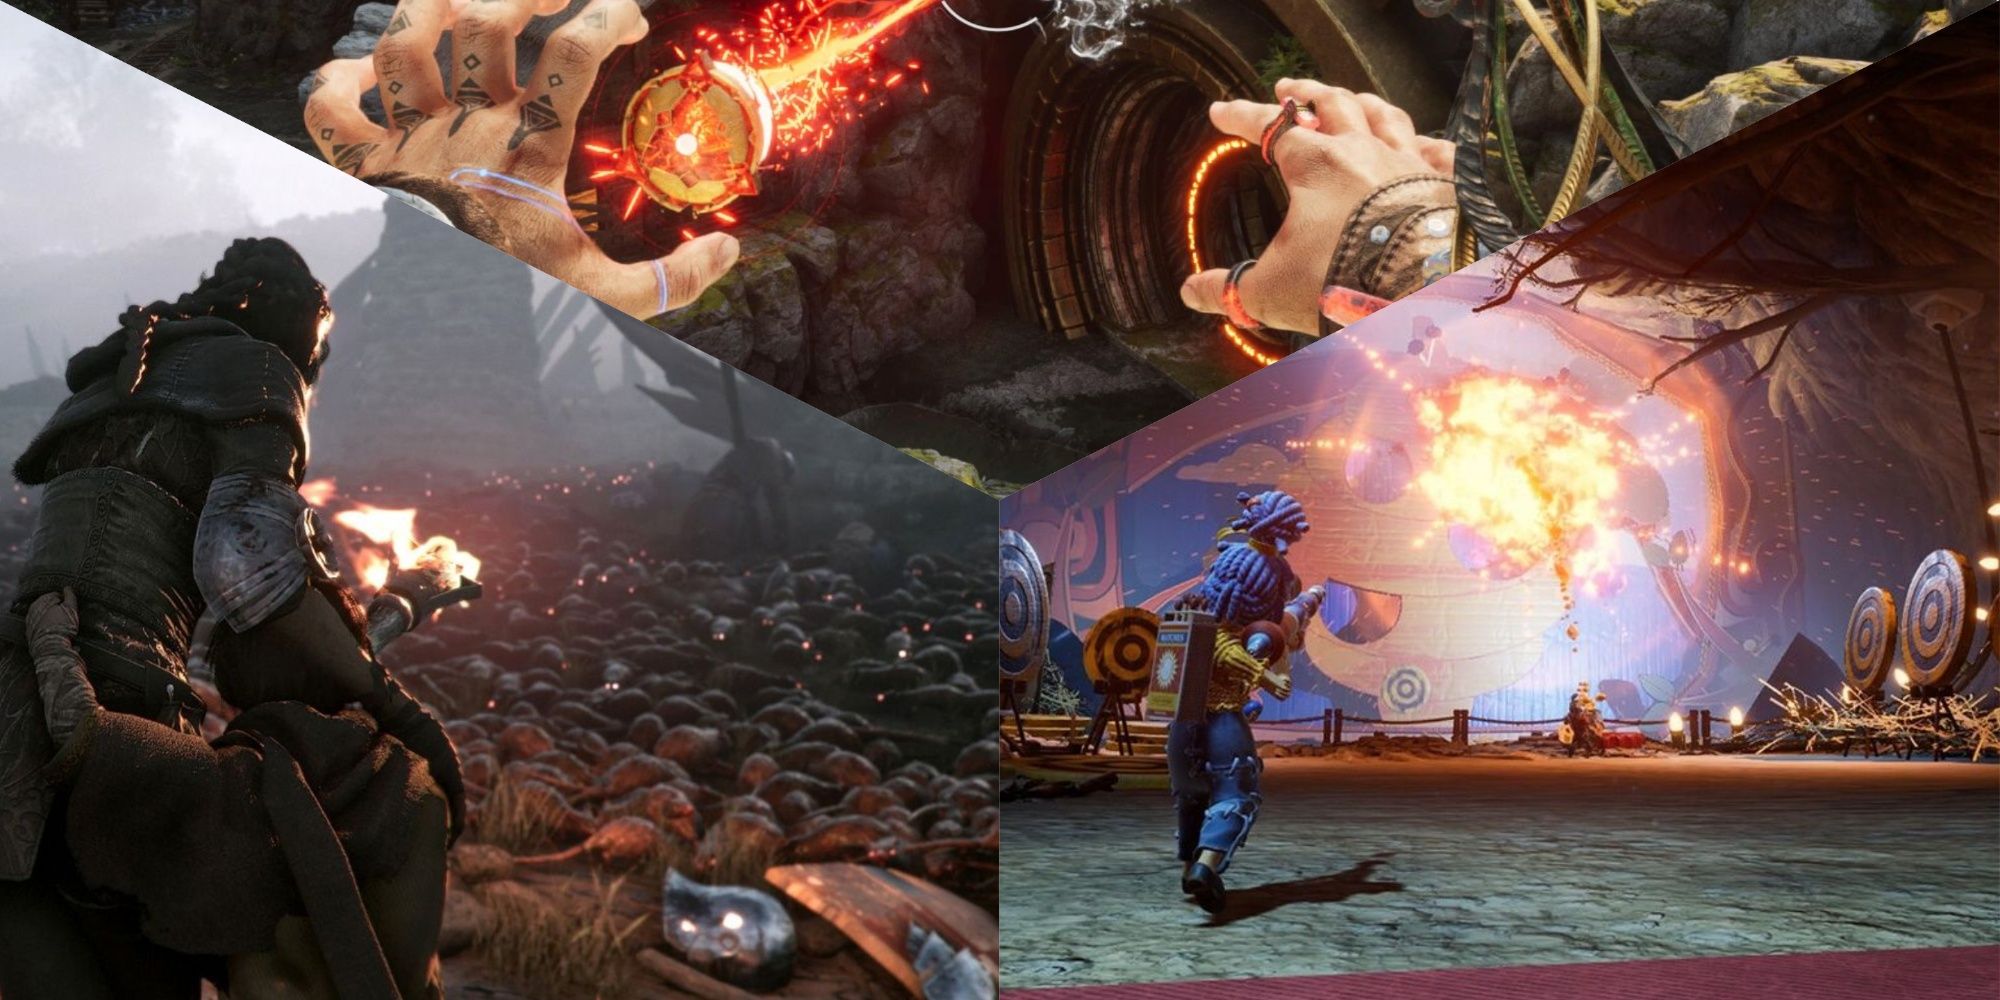 Three-image geometric pattern collage of Amicia and Hugo fending off rats in A Plague Tale: Innocence, Jak in Immortals of Aveum using red magic, and May solving a puzzle in It Takes Two.